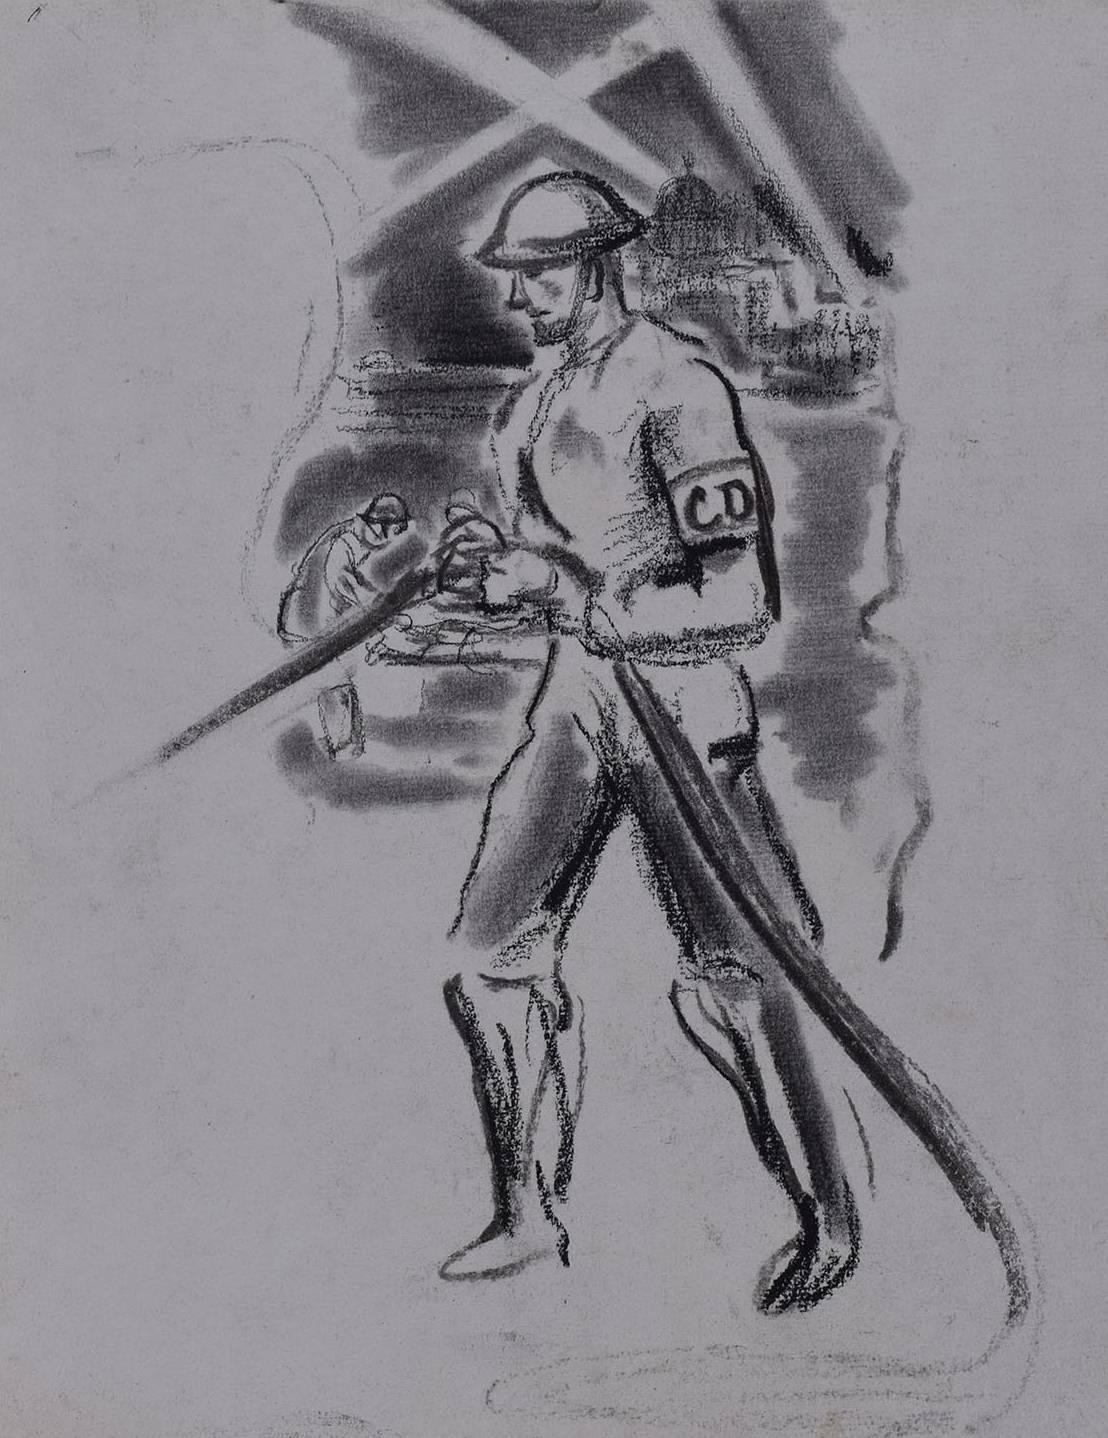 Unknown Landscape Art - The Blitz: A Civil Defence Firefighter before St Paul's Cathedral, London 1940